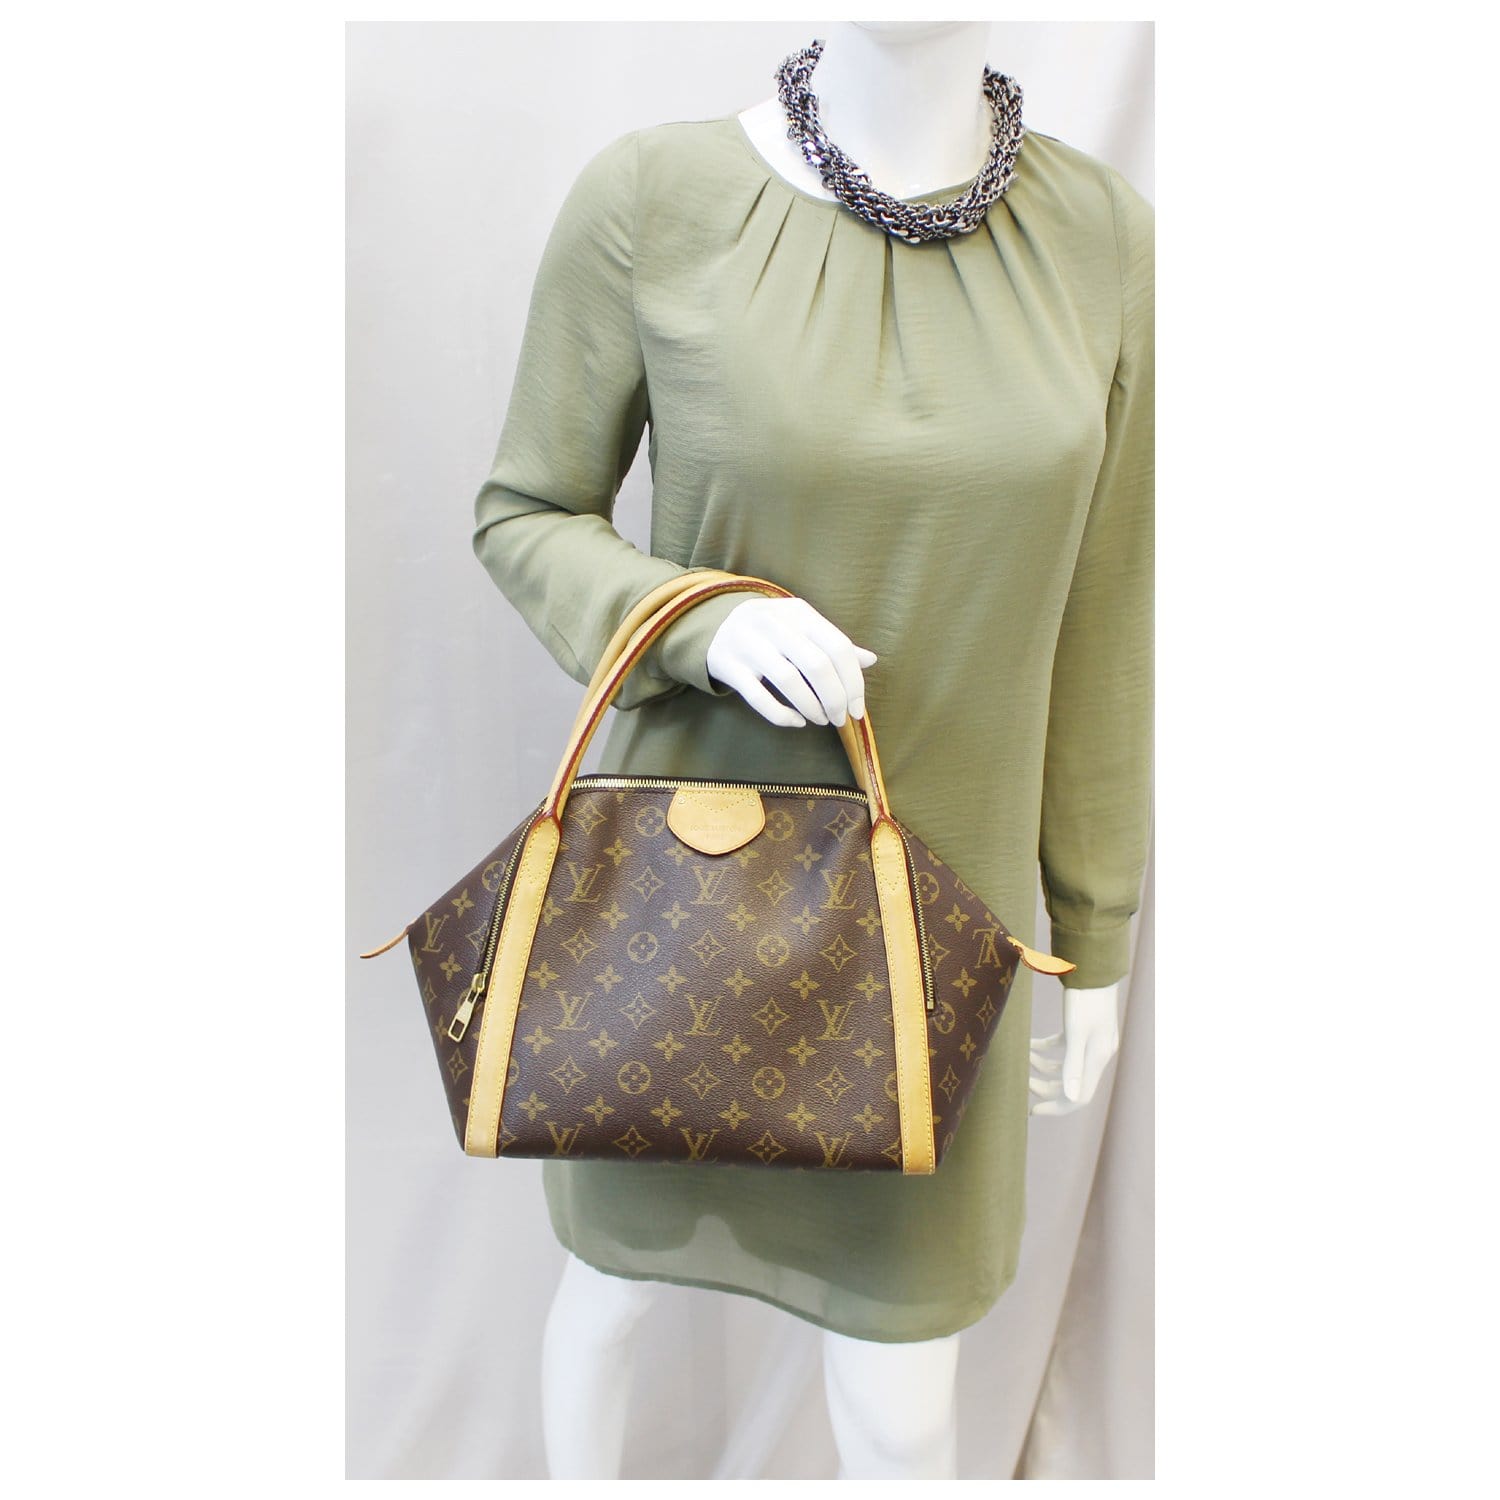 louis vuittons handbags from us